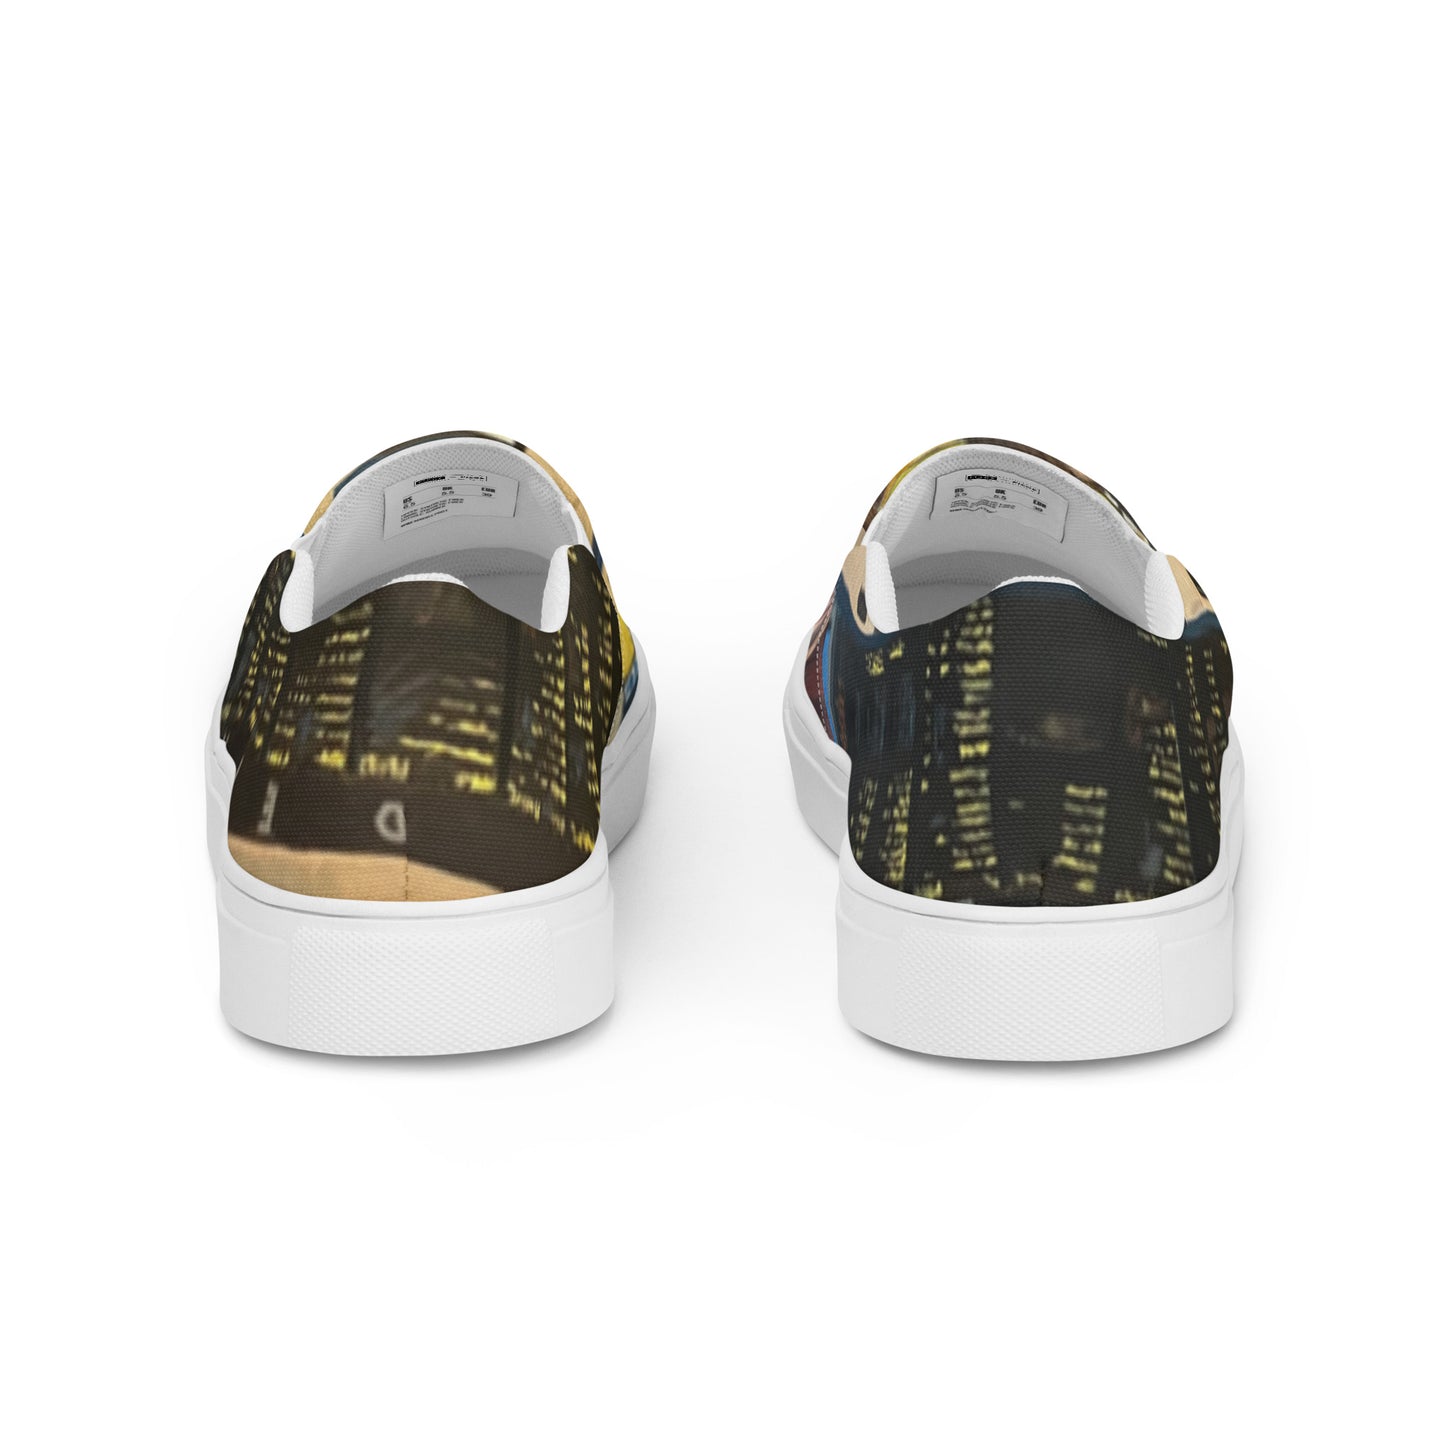 In the City - Women’s slip-on canvas shoes